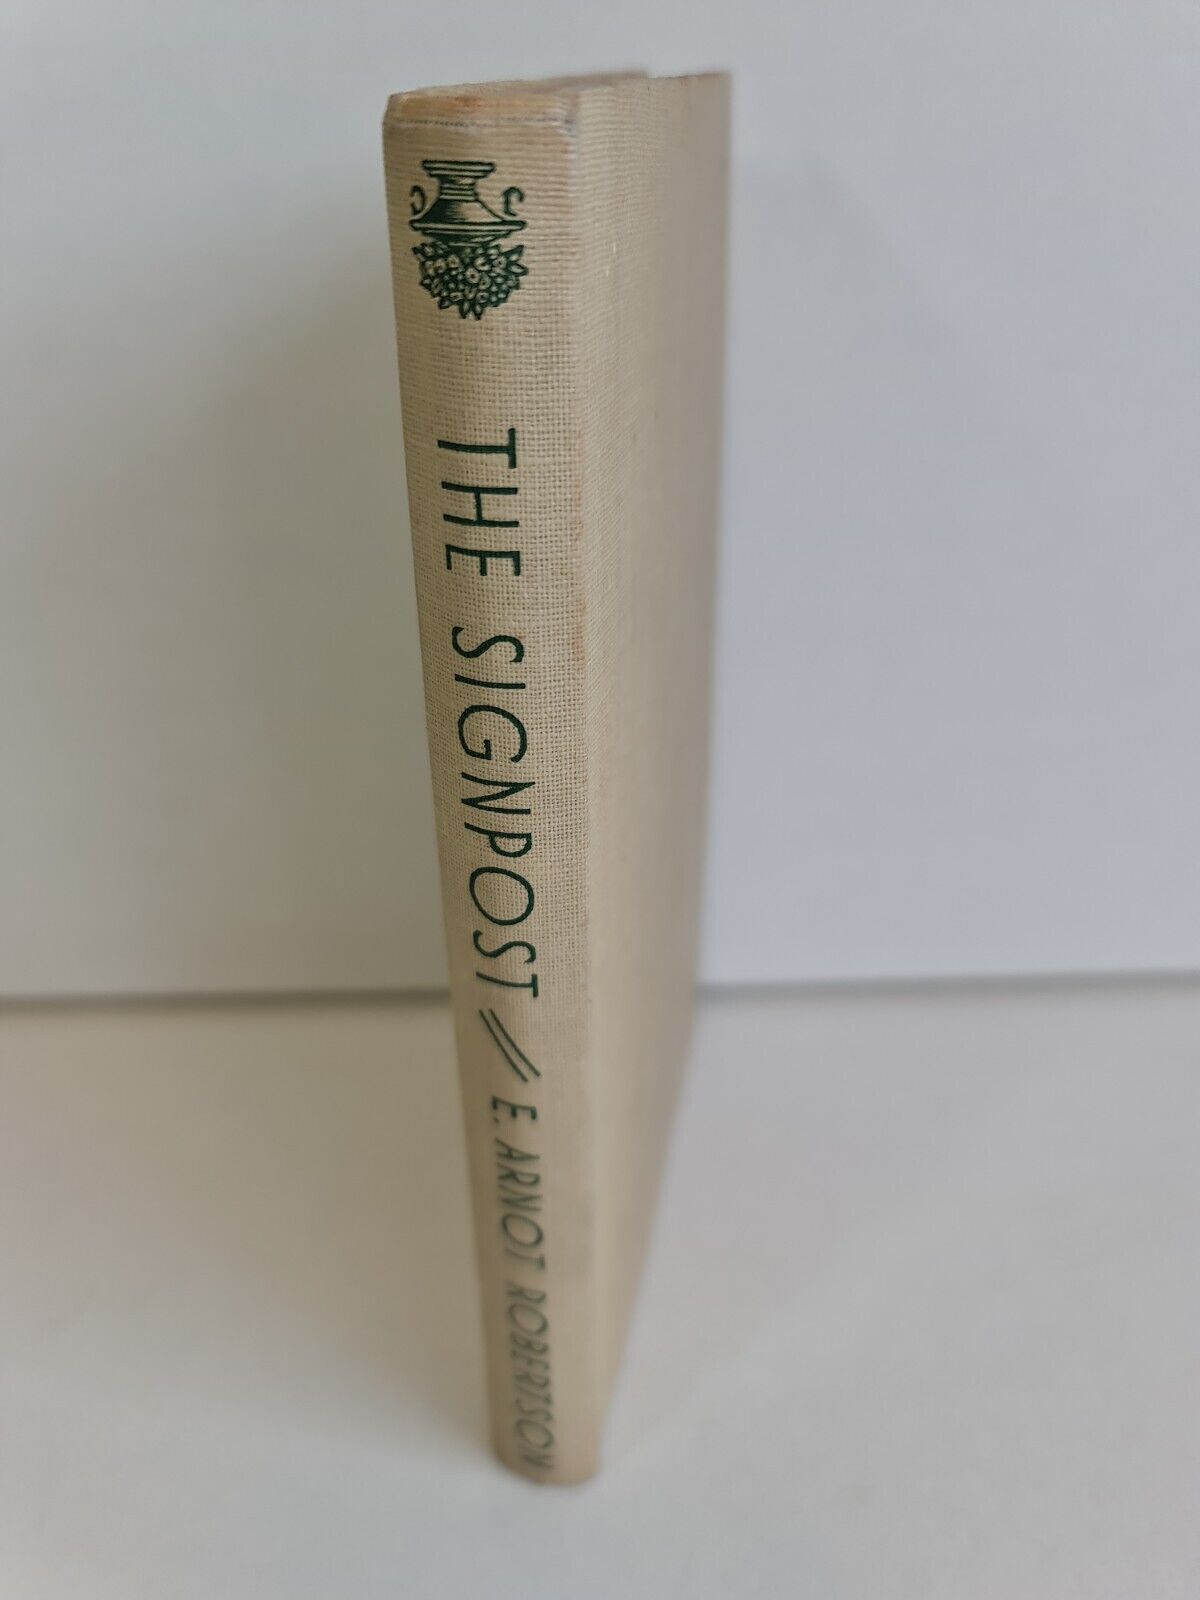 The Signpost by E. Arnot Robertson (1947)